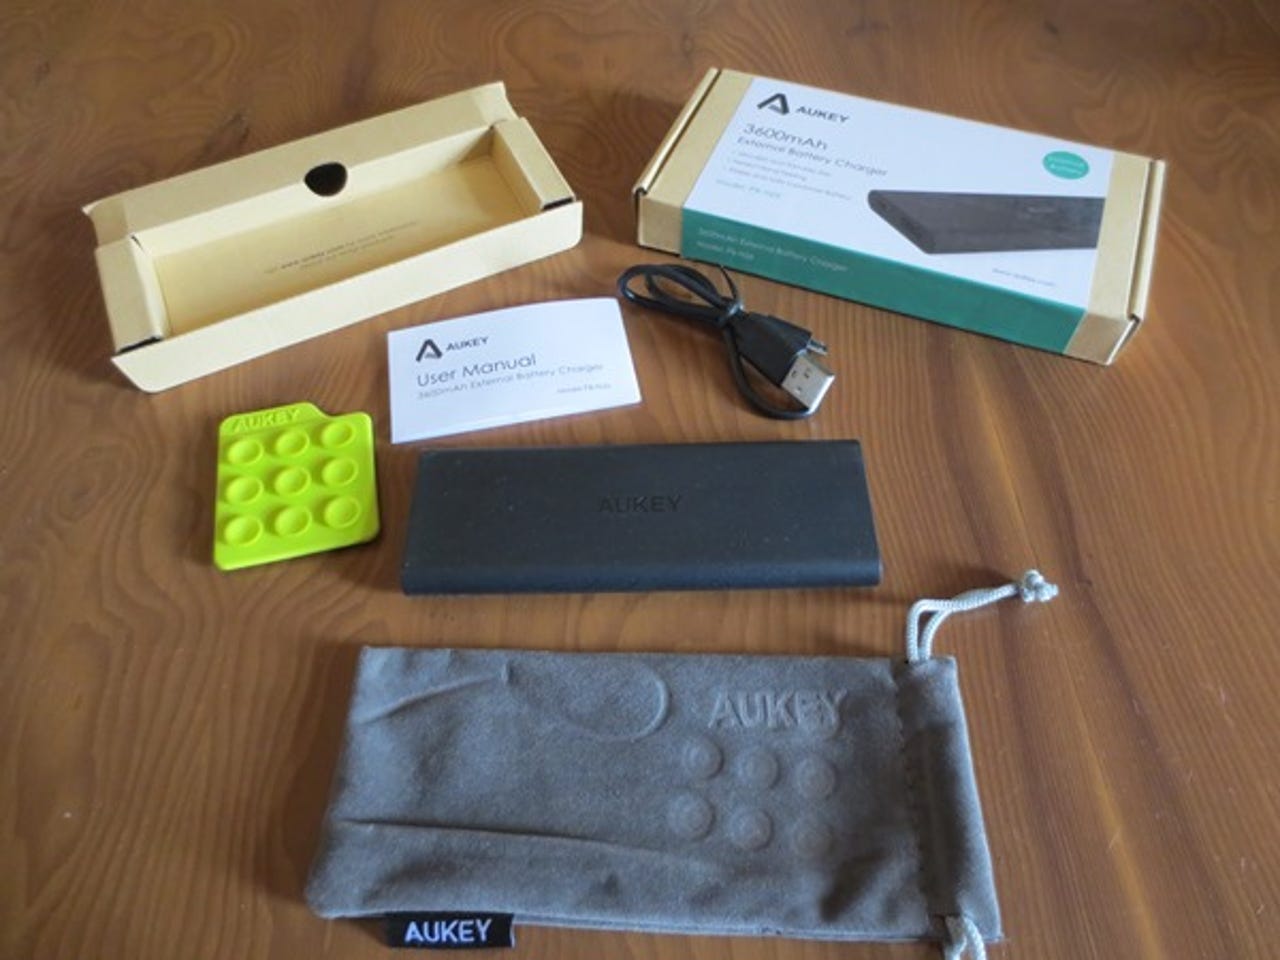 Review: comparison of Aukey external battery chargers 3600mAh ZdNet